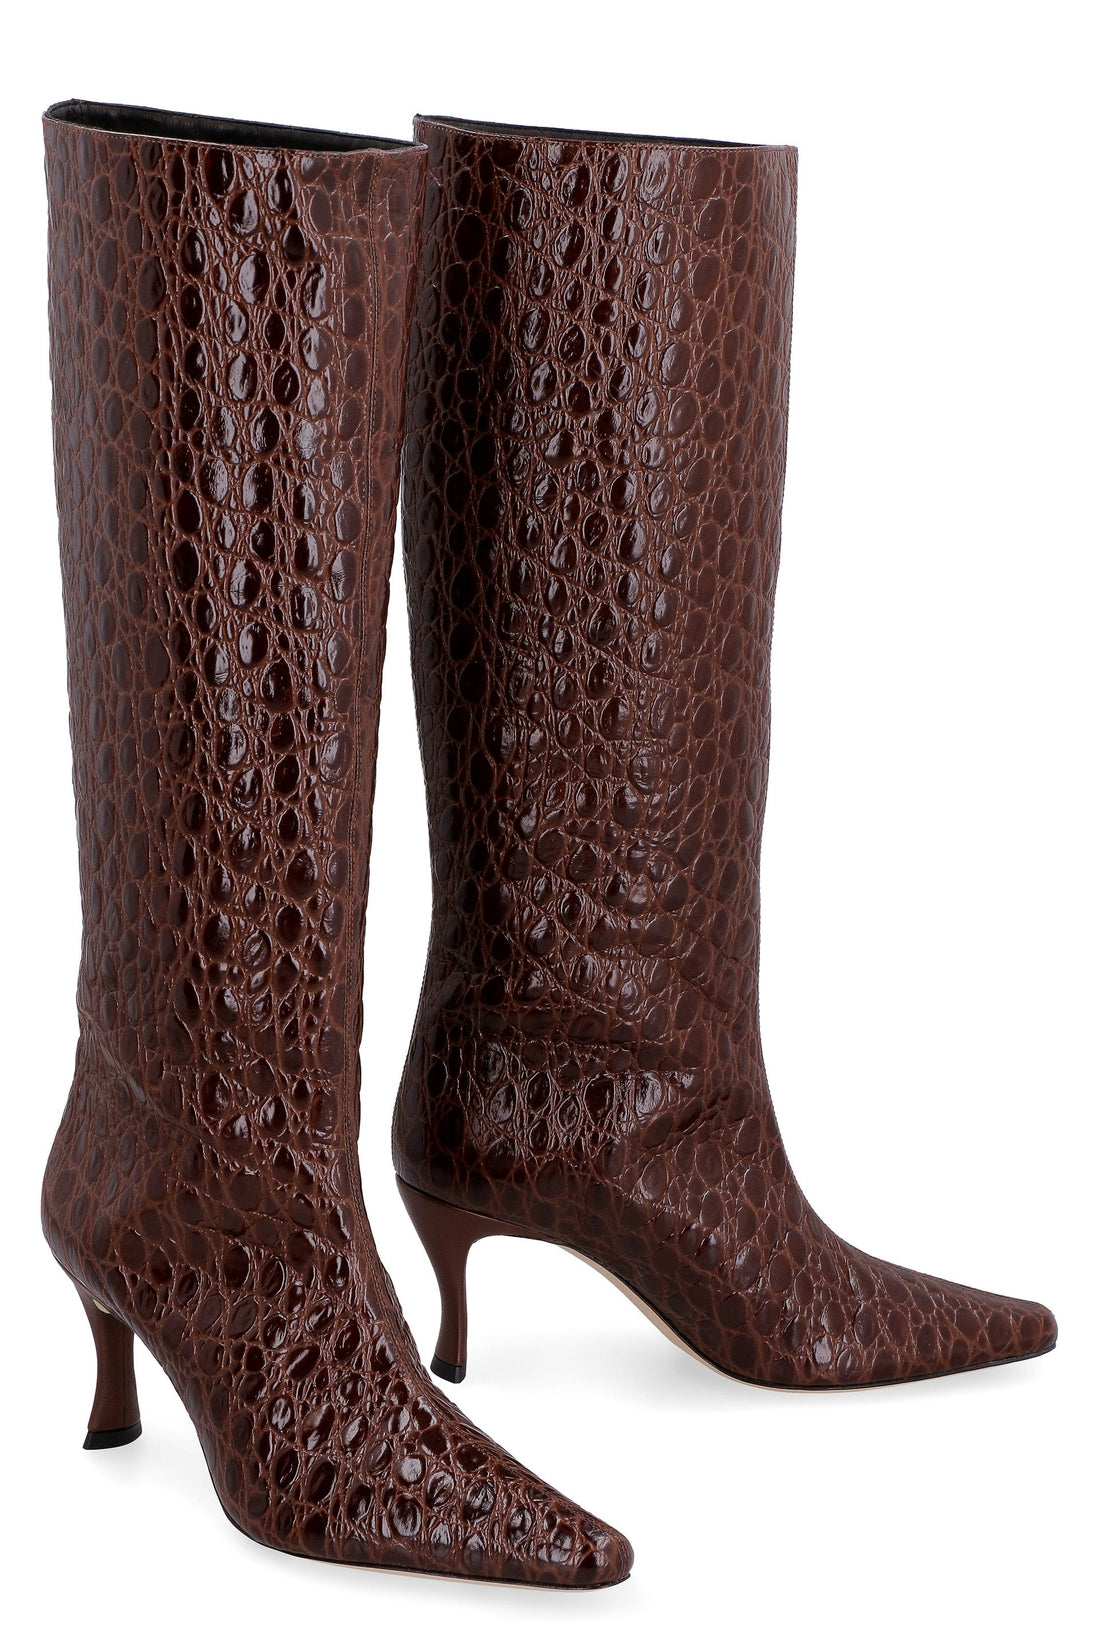 BY FAR-OUTLET-SALE-Stevie croco-print leather boots-ARCHIVIST